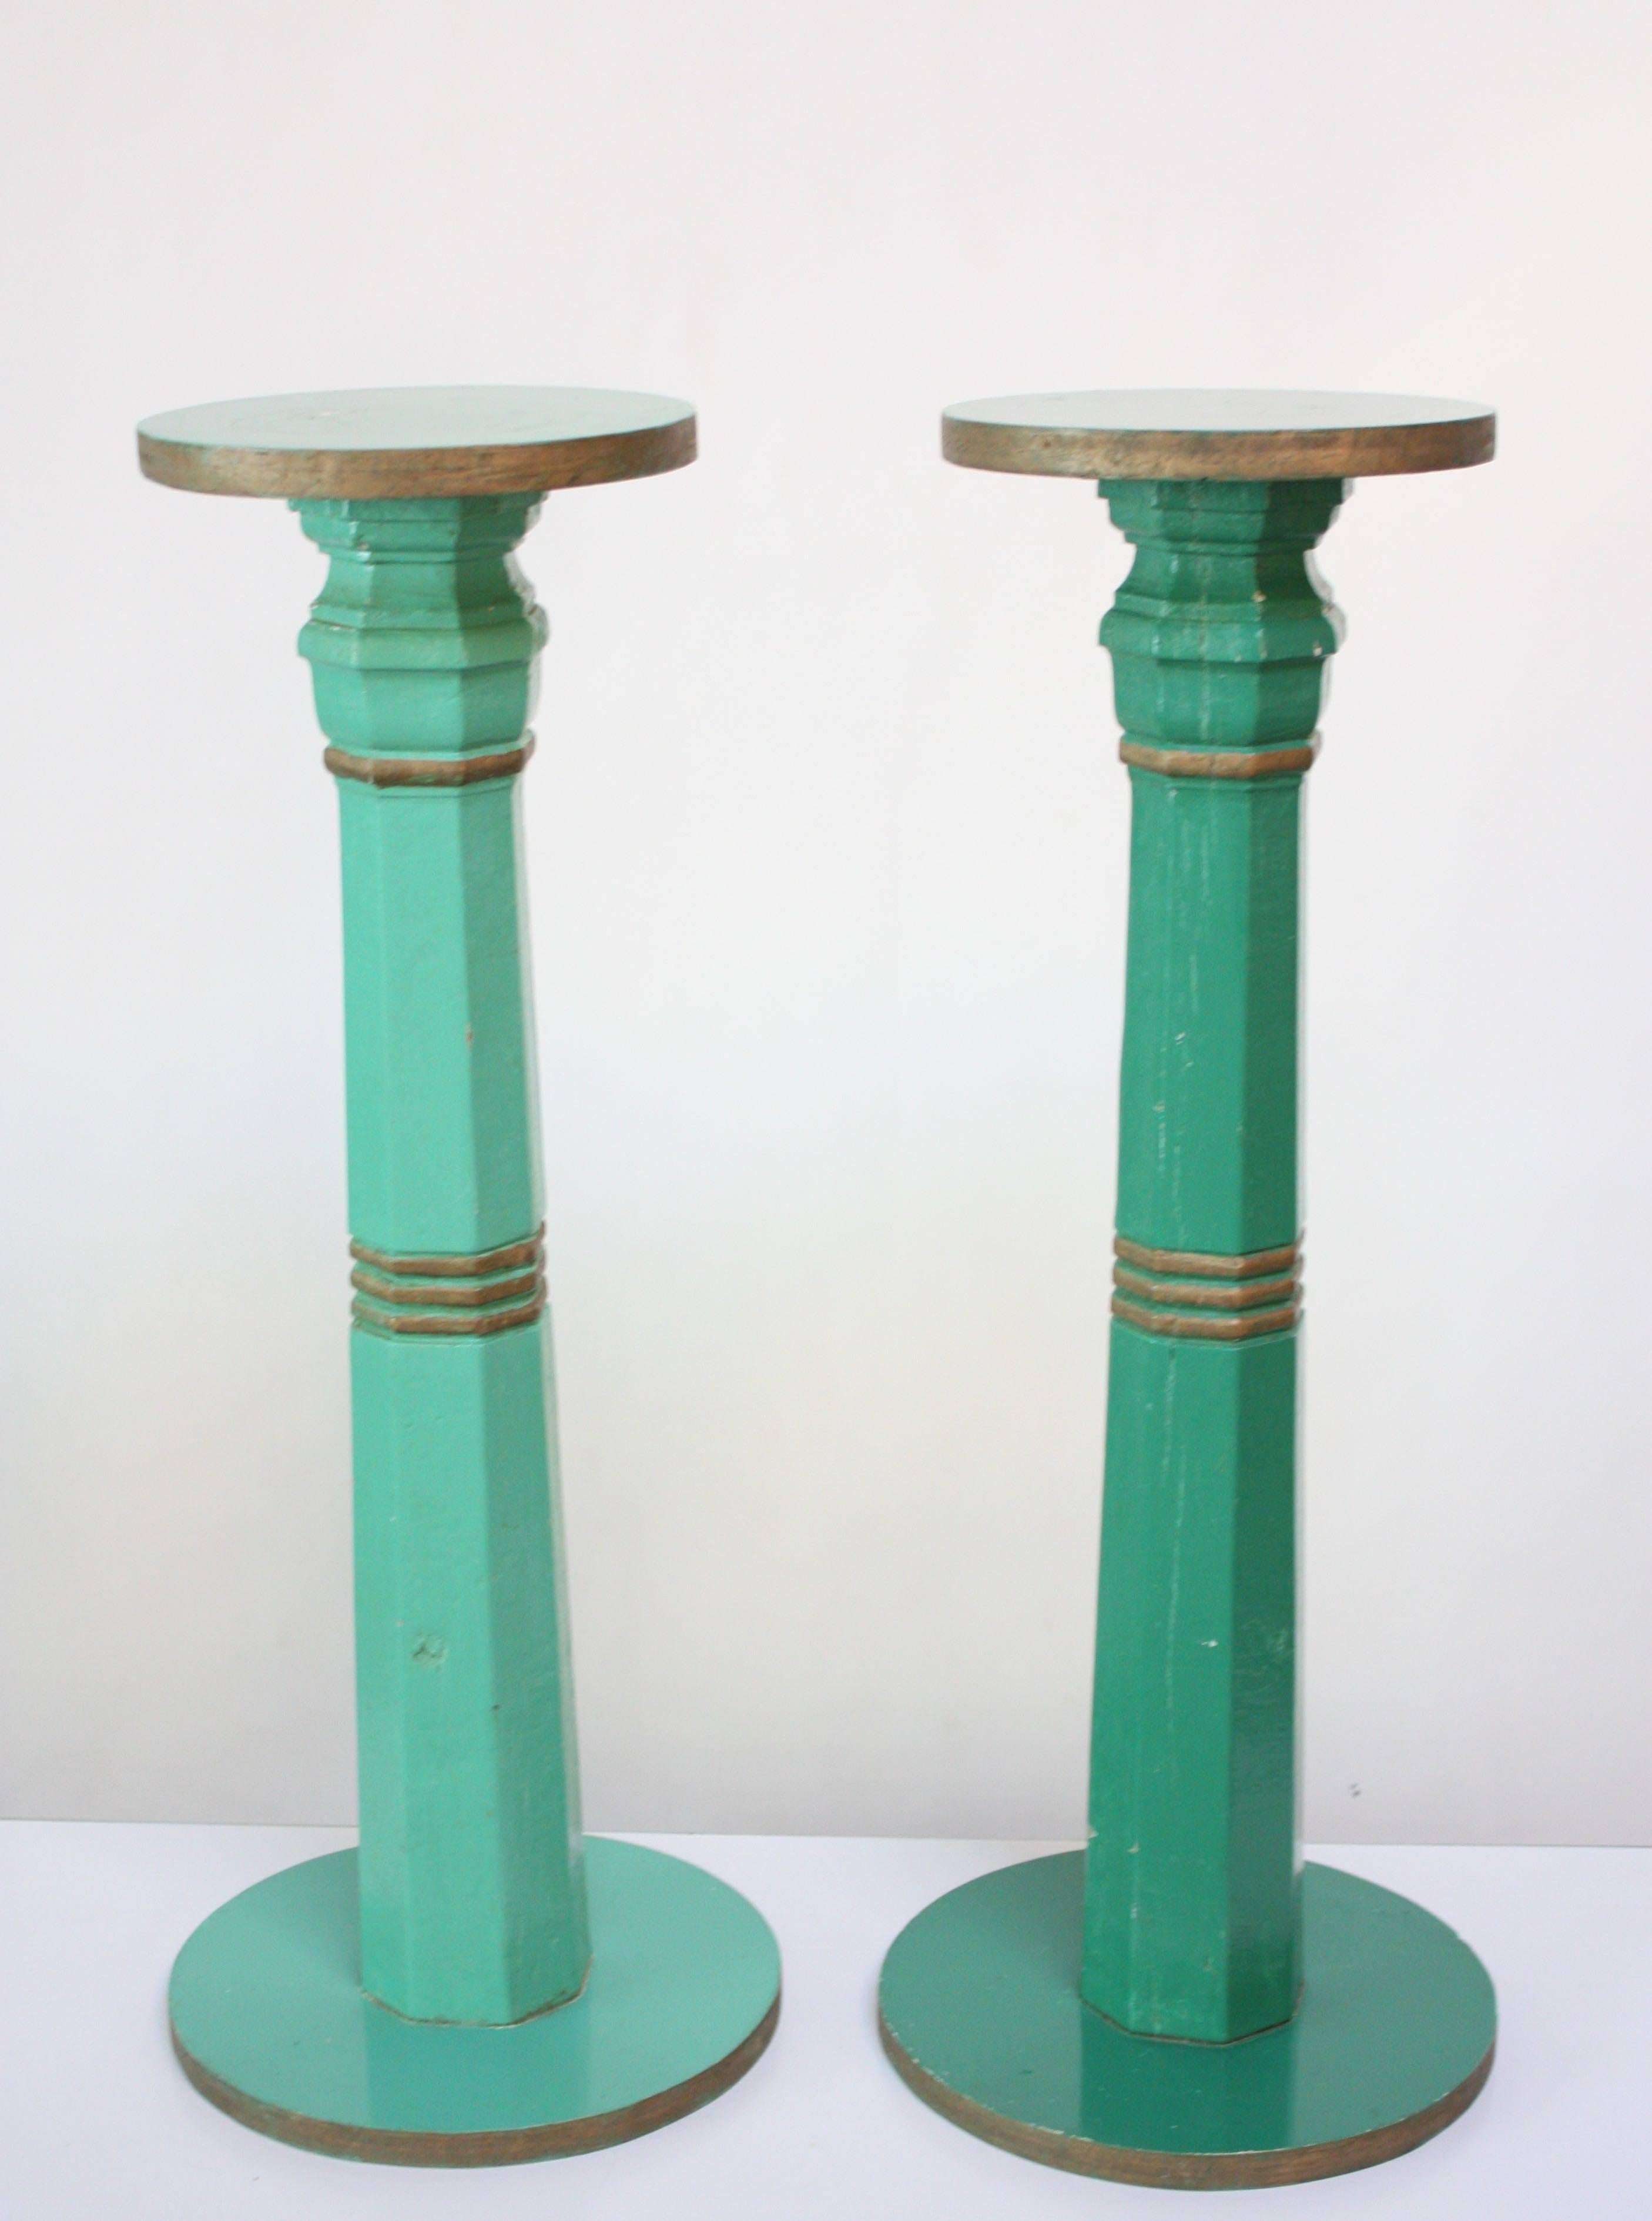 Pair of charming Primitive circular column pedestals in mint green with gold painted accents (one slightly darker than the other). Moderate surface wear commensurate with age and use as well as spots of paint loss throughout. 
Base diameter: